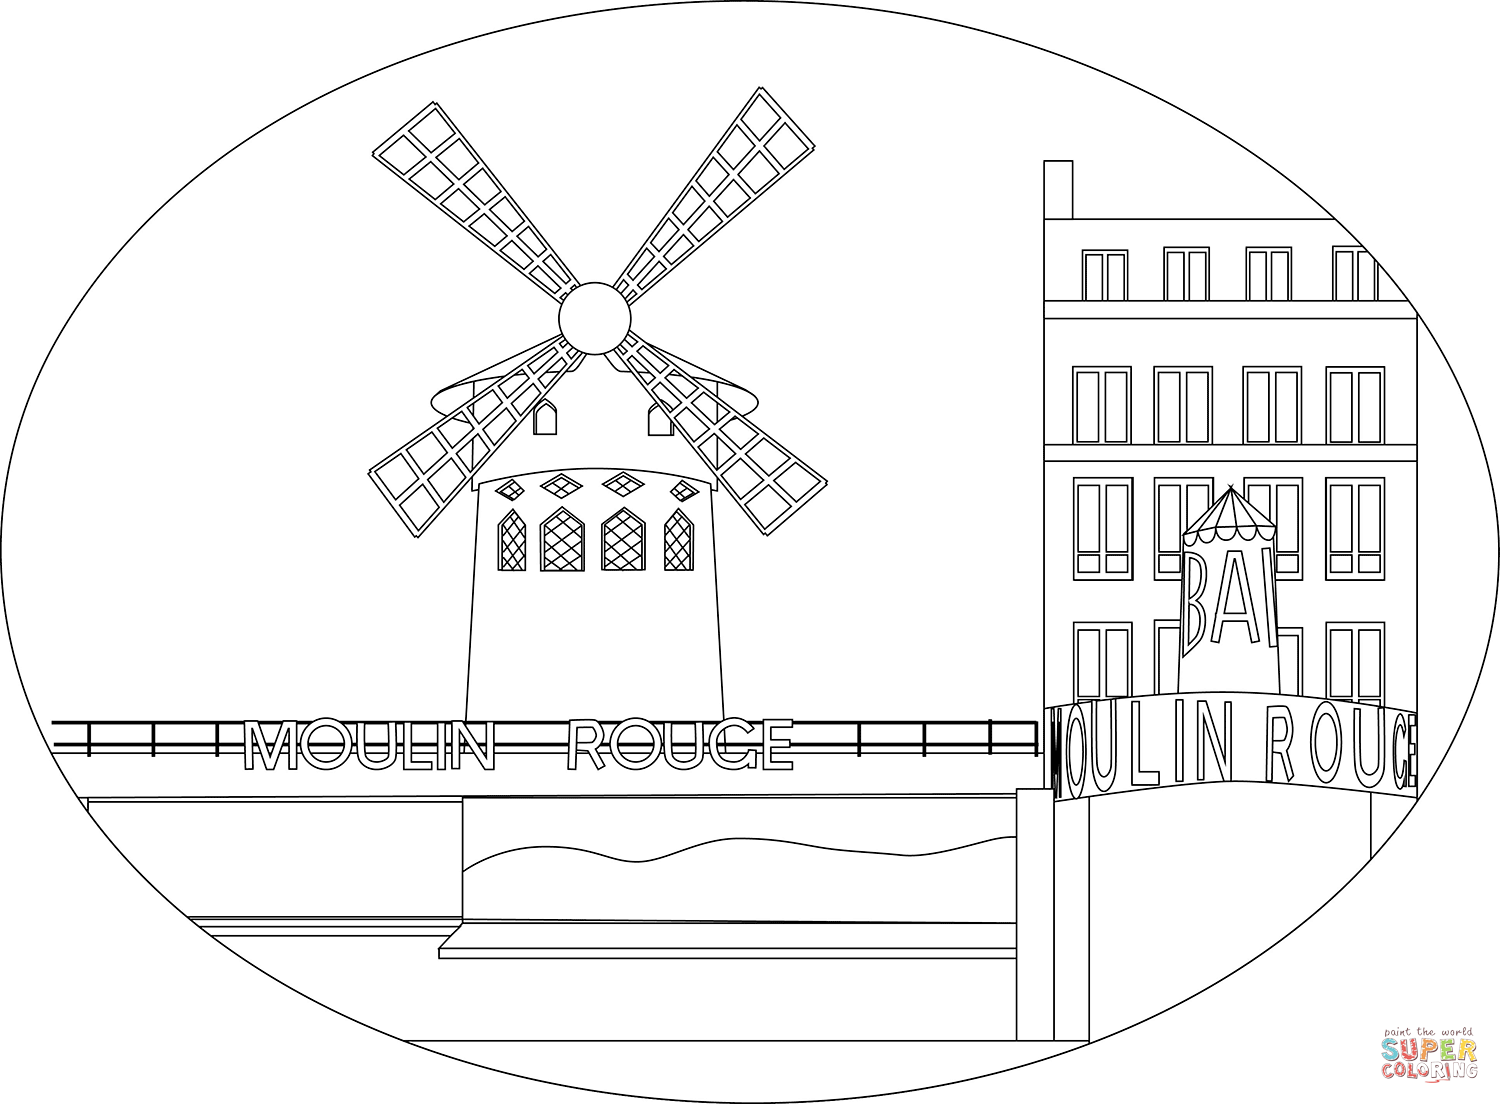 Moulin rouge coloring page free printable coloring pages